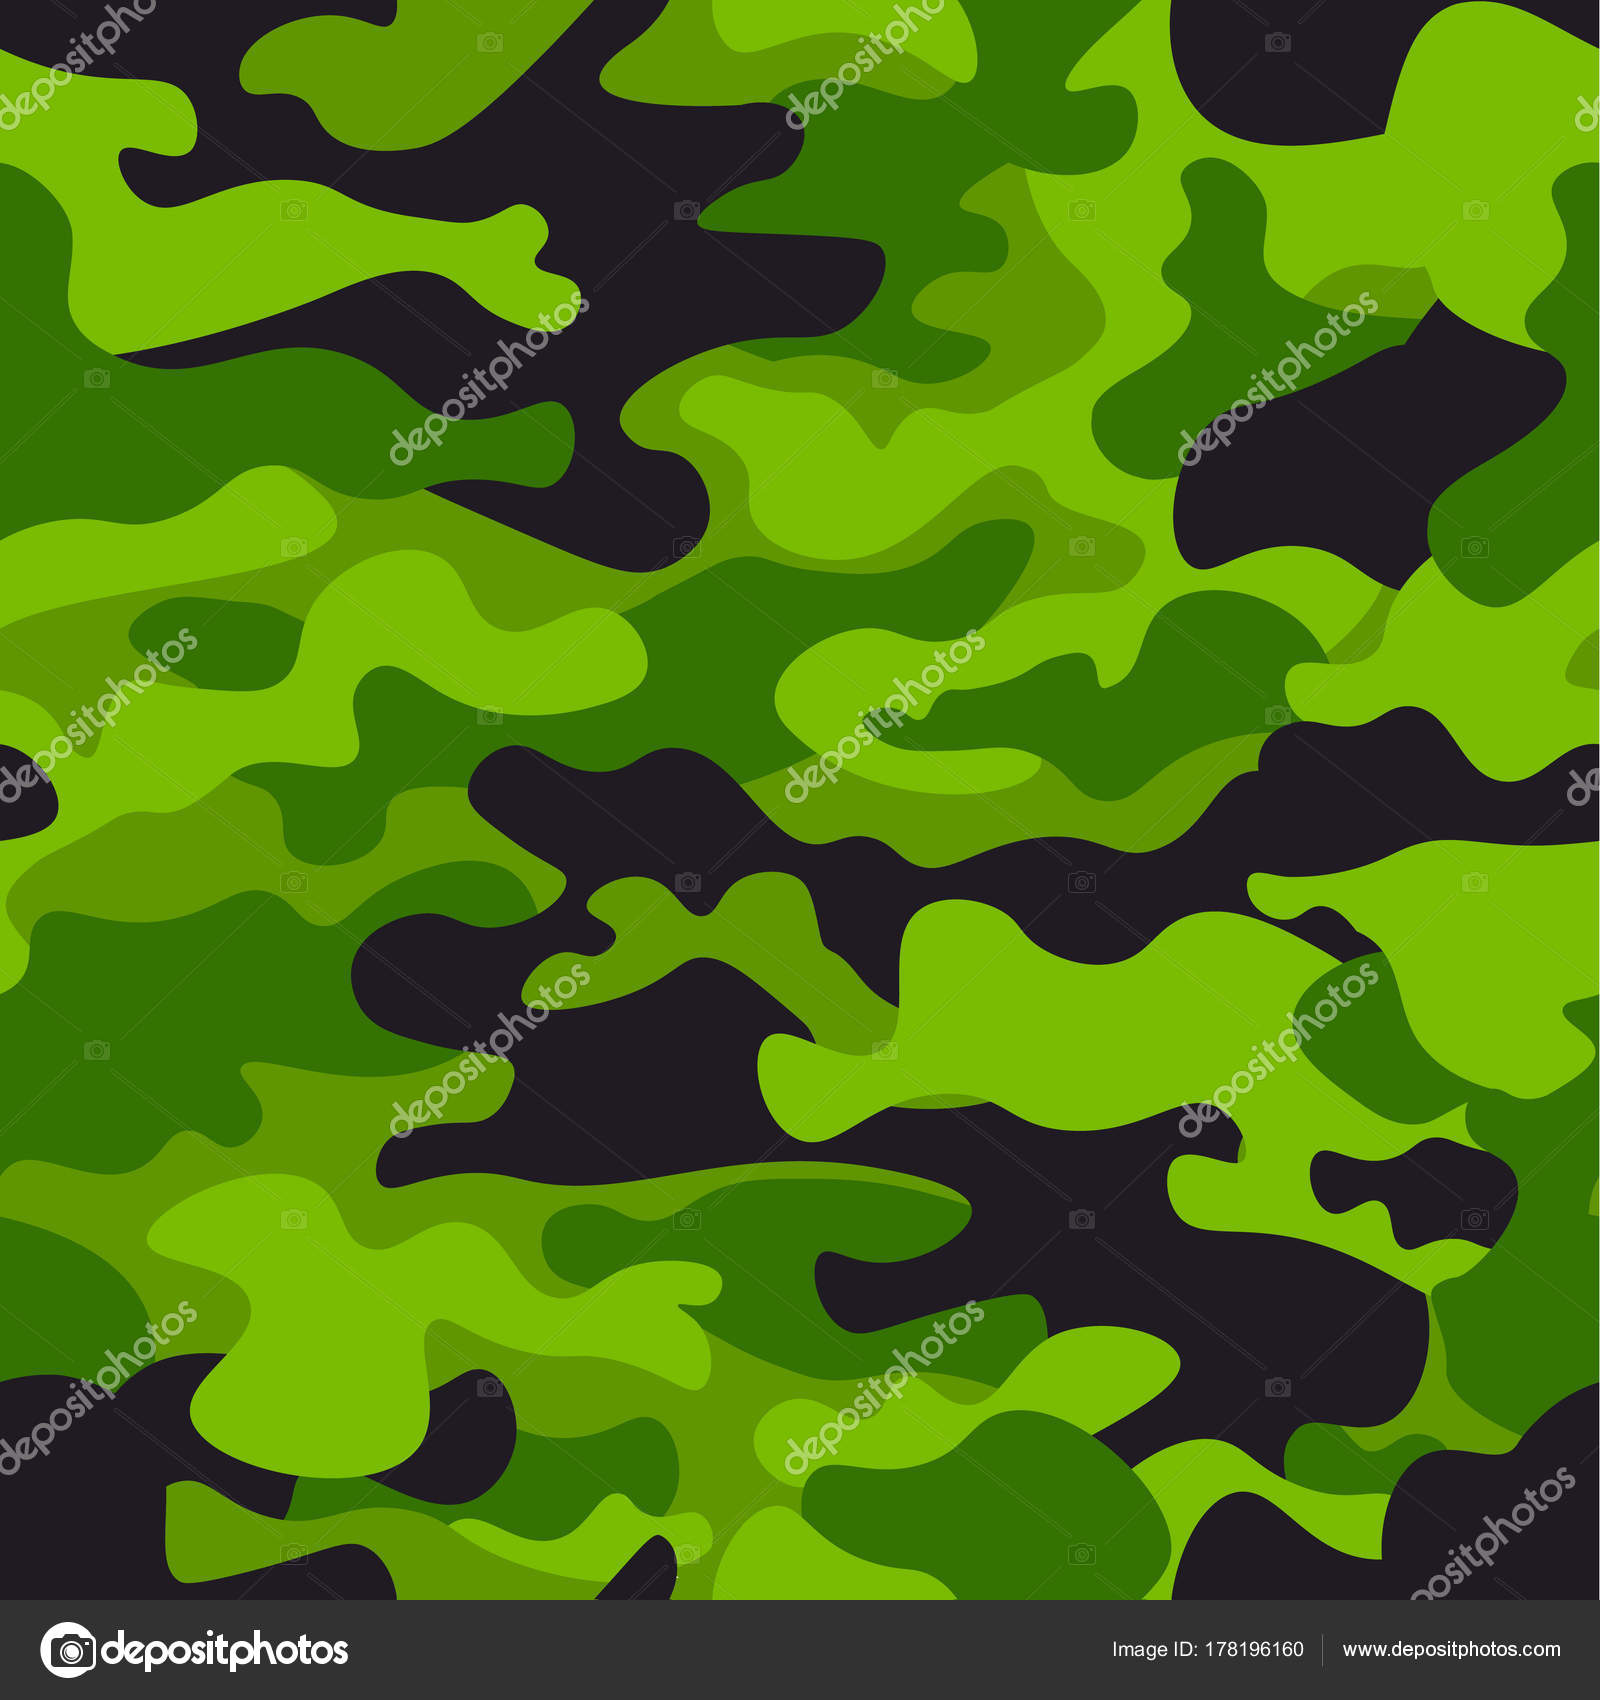 Green camouflage seamless pattern background. Classic clothing